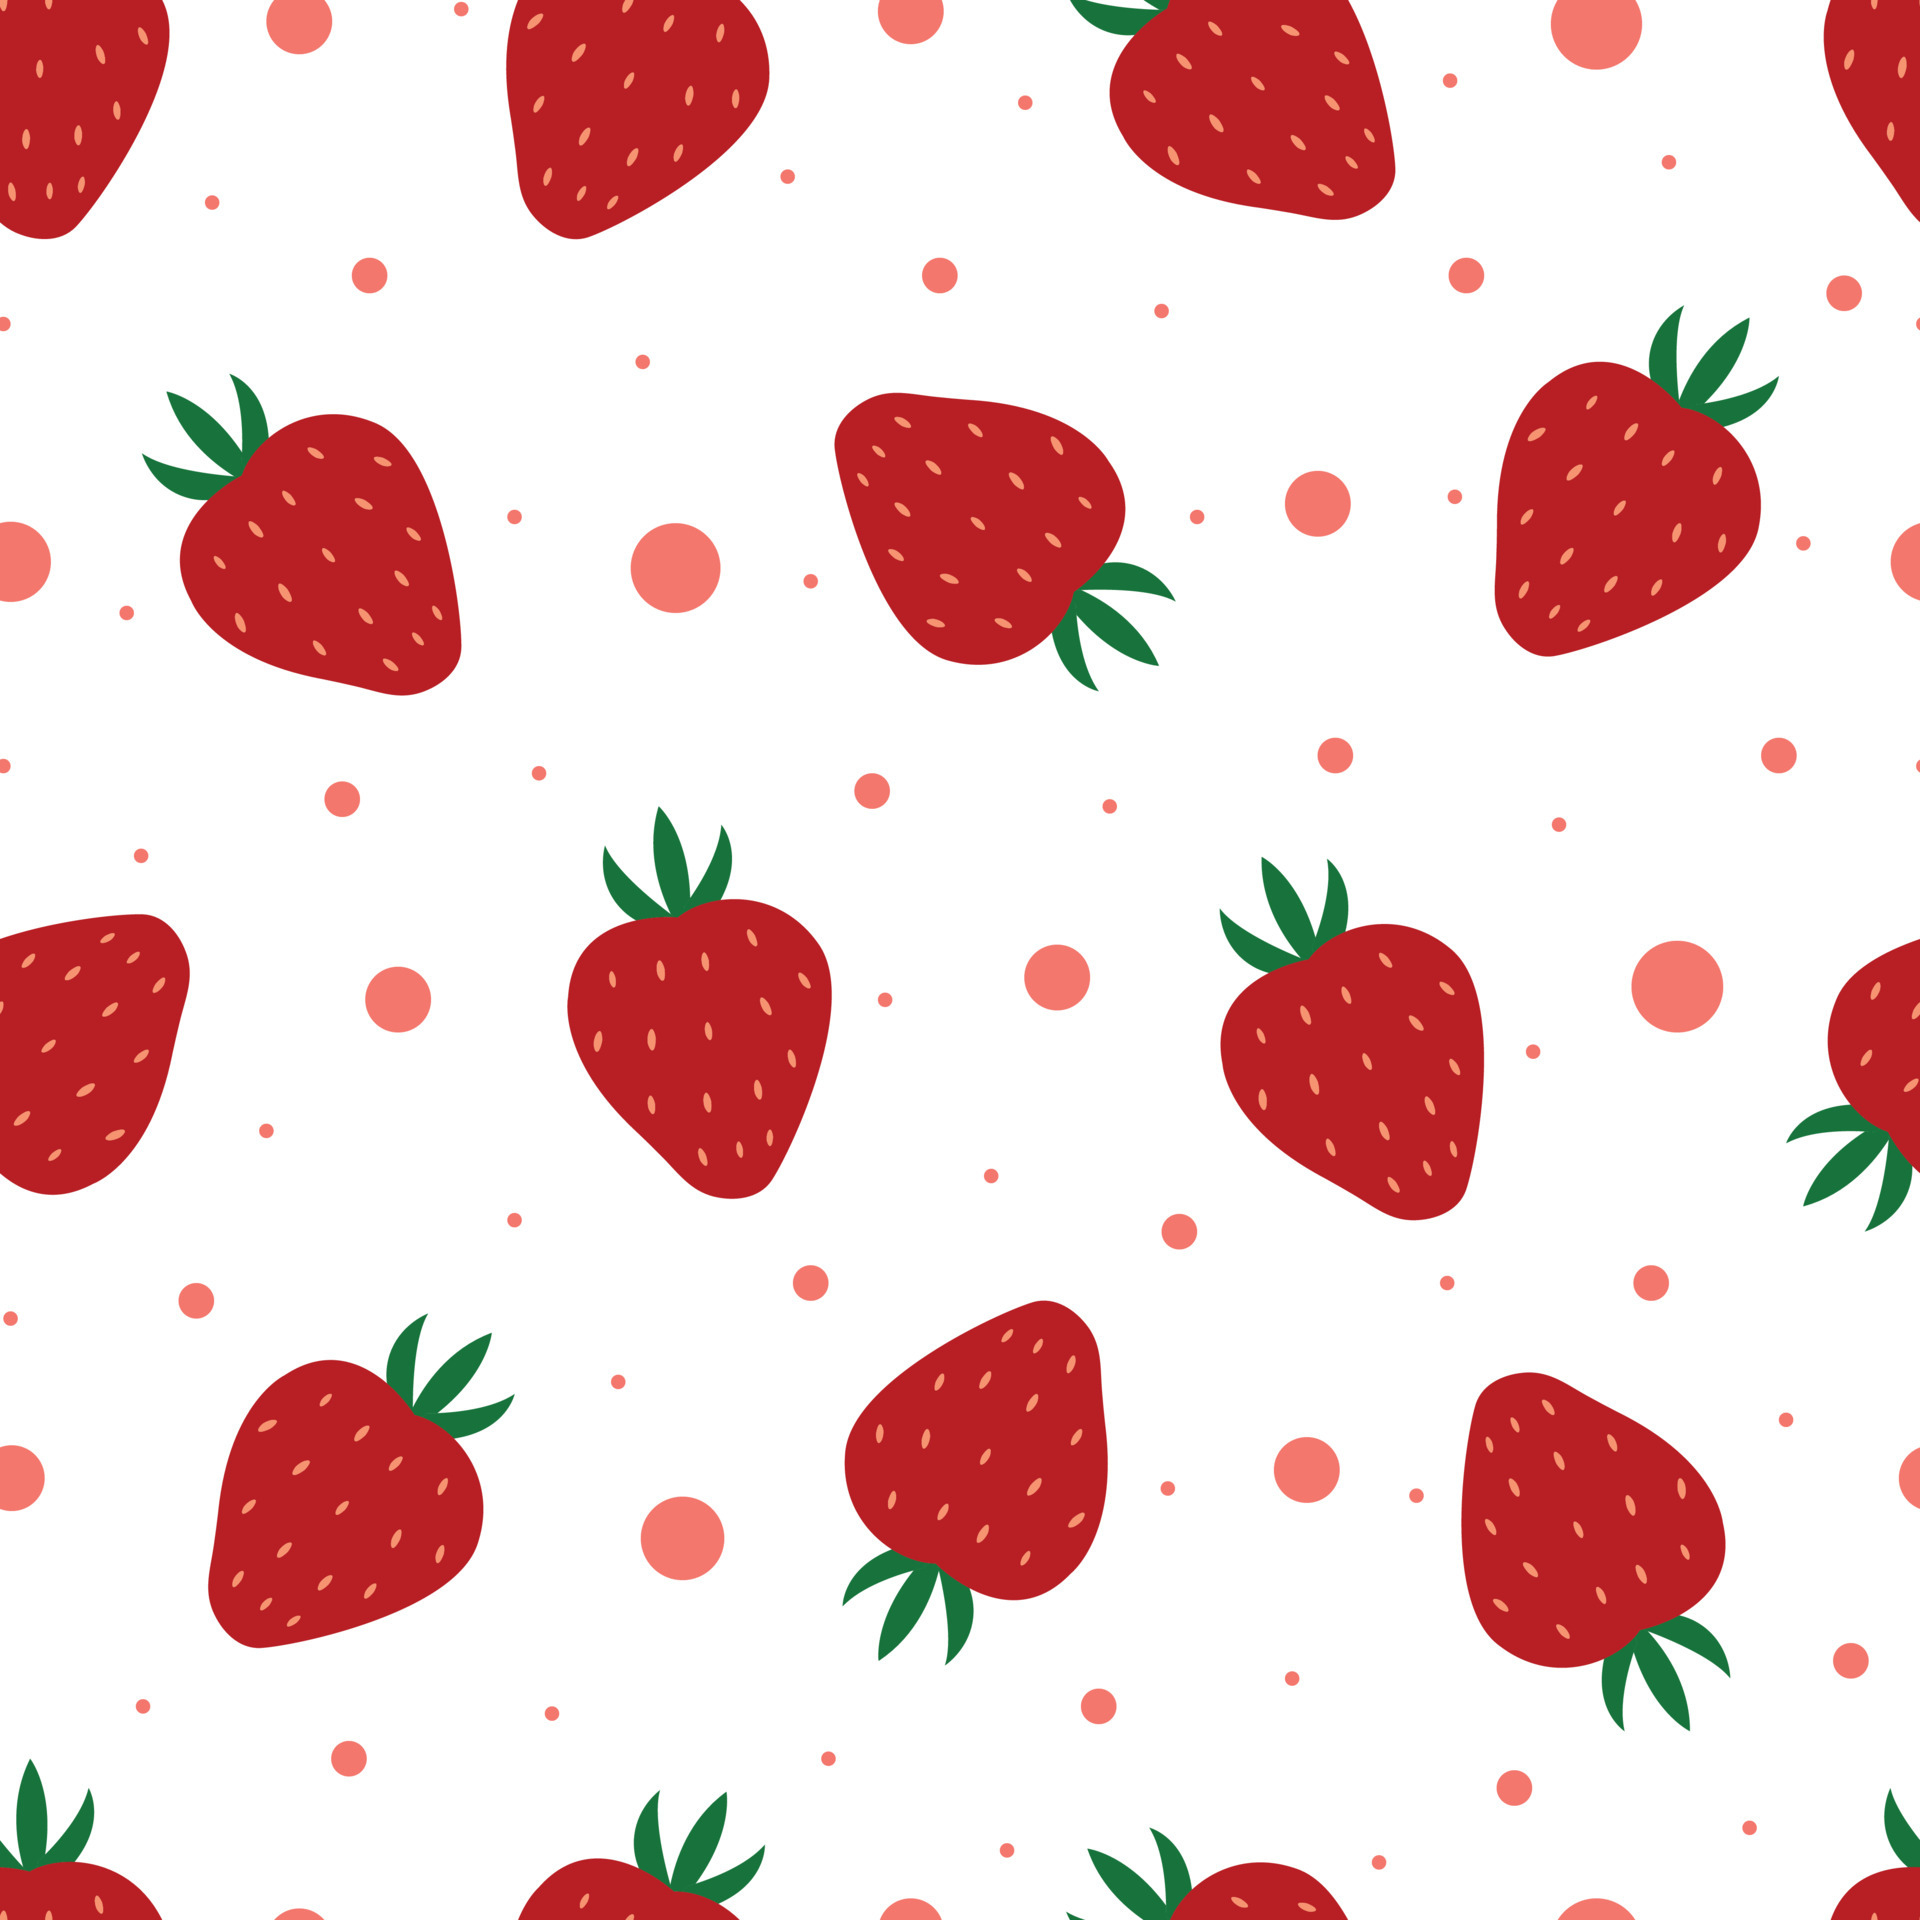 1920x1920 Strawberry seamless pattern fruit background hand drawn in cartoon style Used for printing, wallpaper, textile Vector illustration 4552565 Vector Art